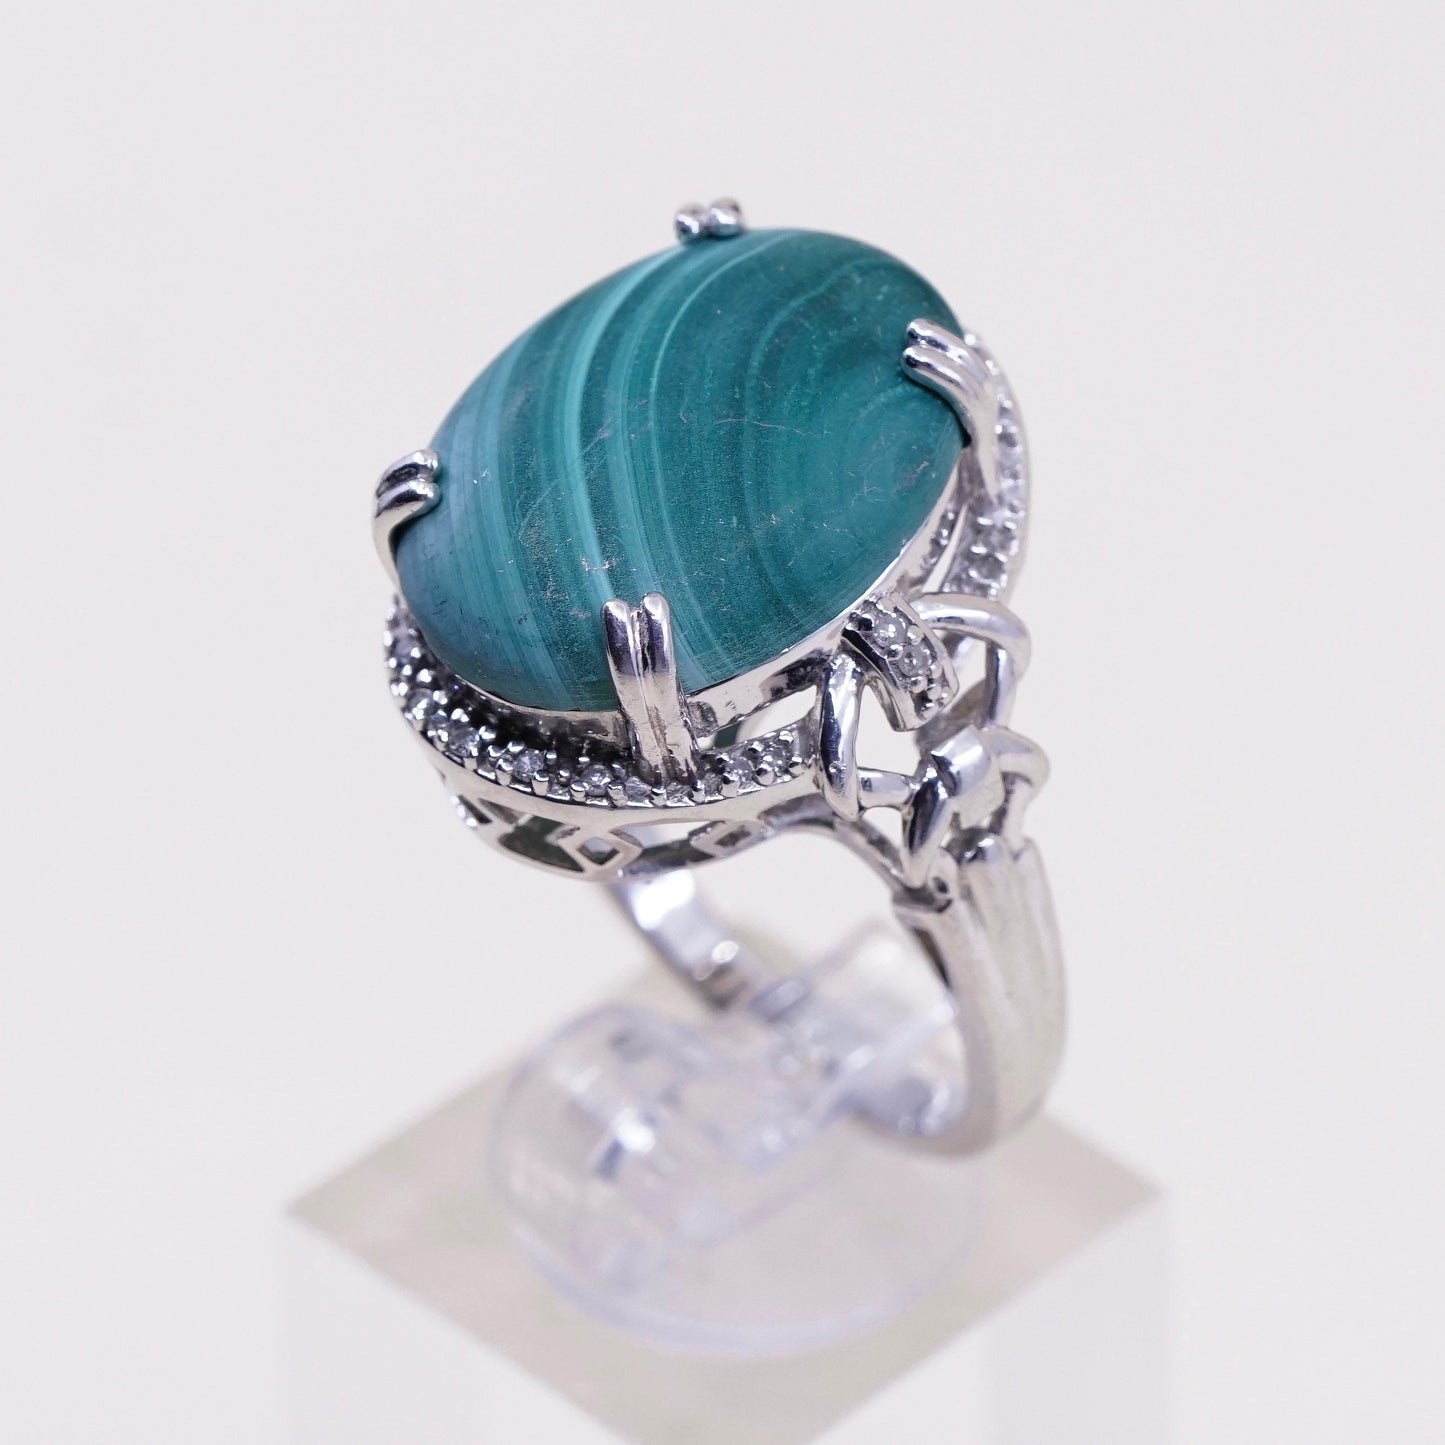 Size 9.25, sterling 925 silver handmade ring with malachite and cluster diamond